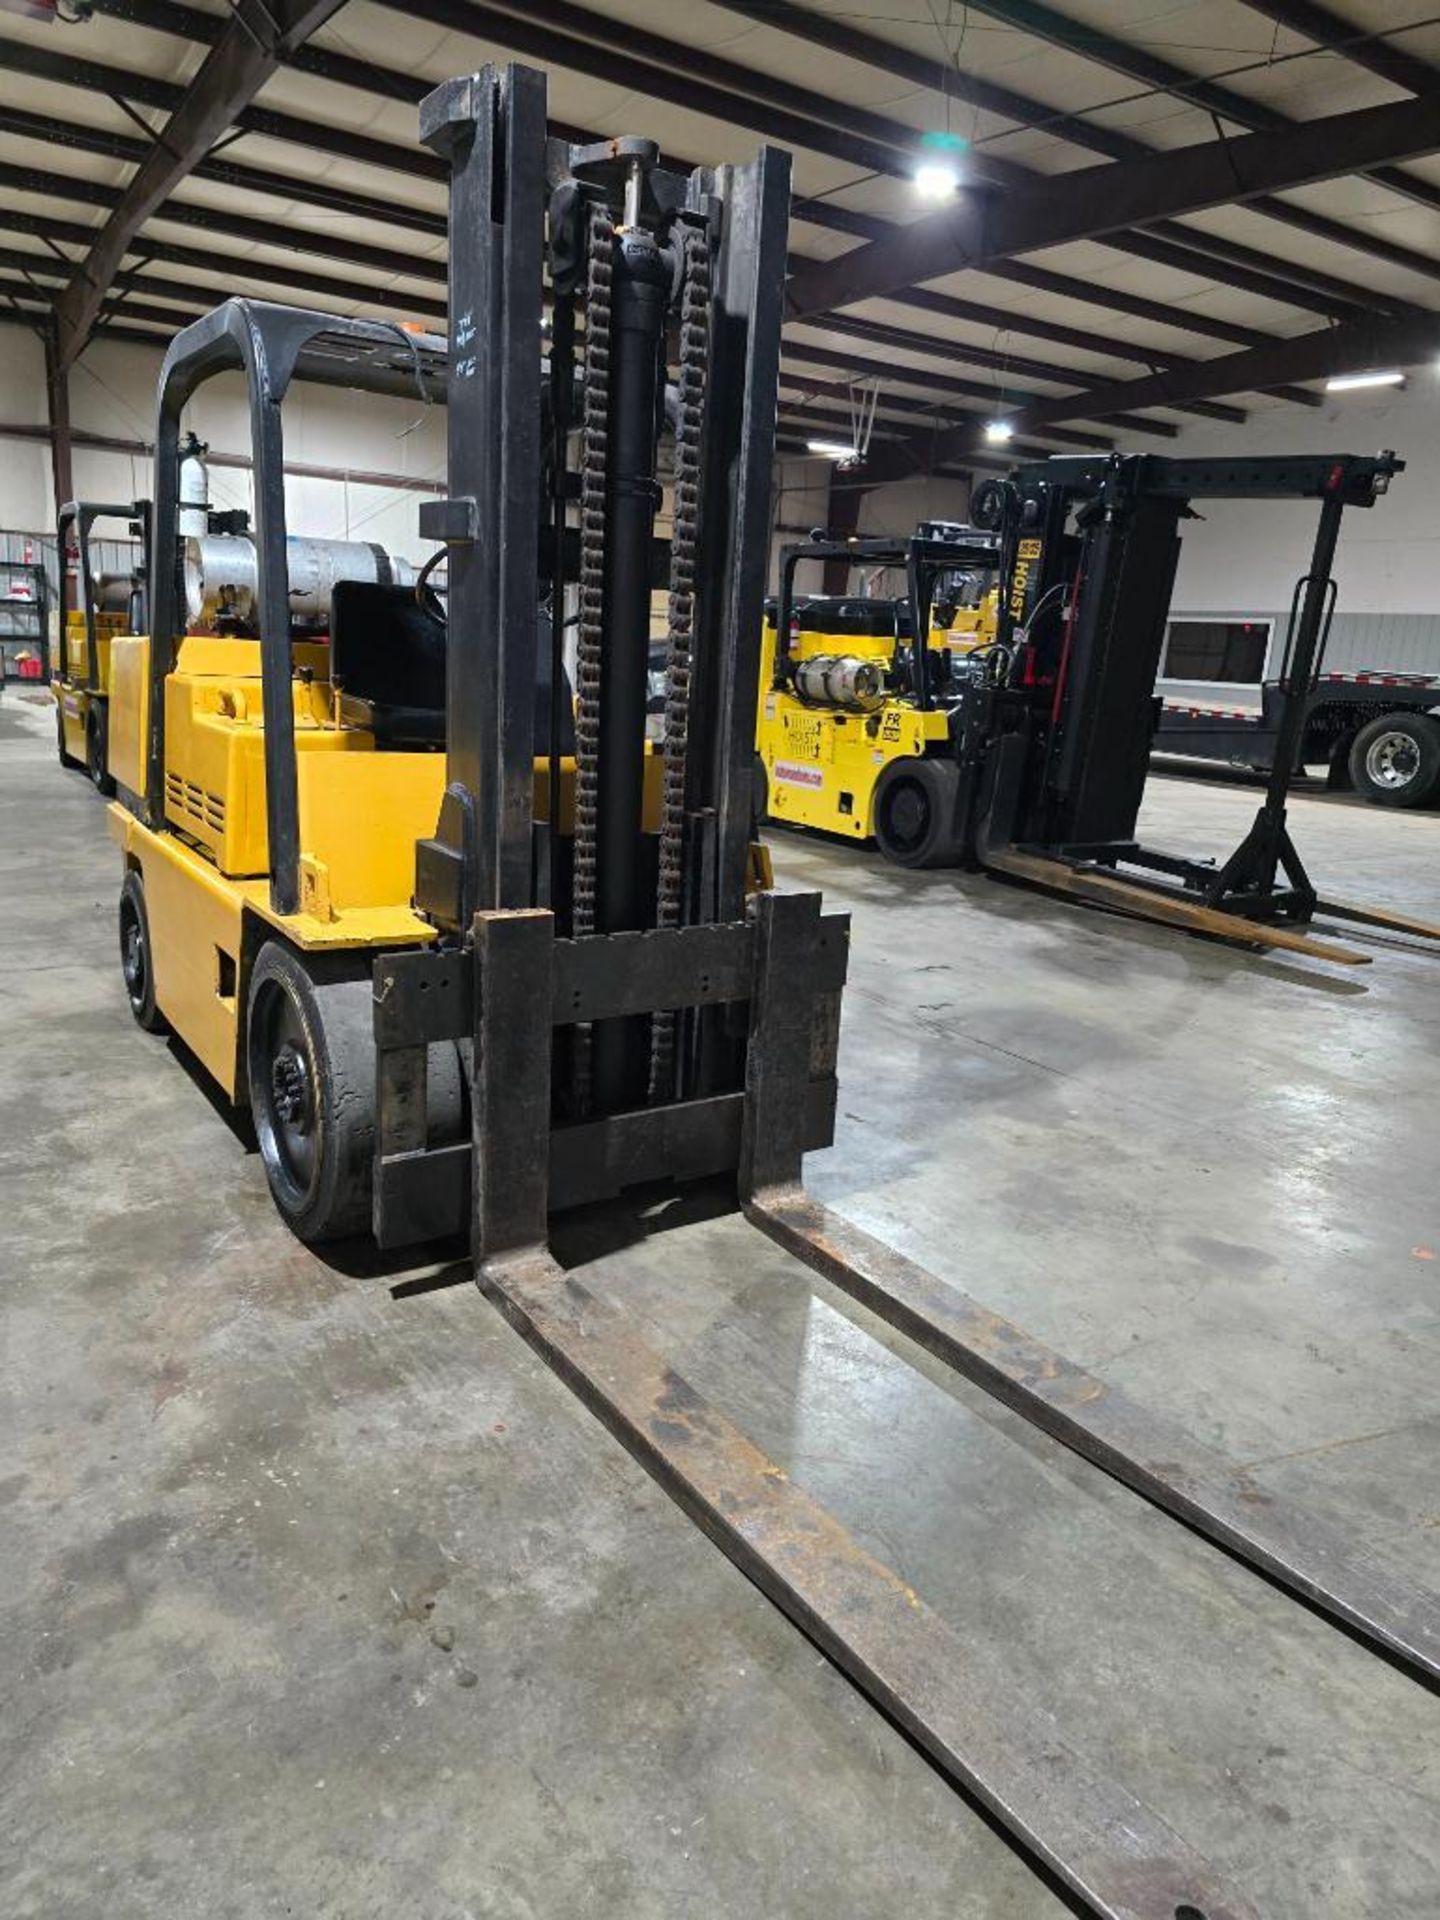 Caterpillar 12,500-LB. Capacity Forklift, Model 125D, LPG, Cushion Tires, 2-Stage, 94-3/4" Lowered, - Image 5 of 11